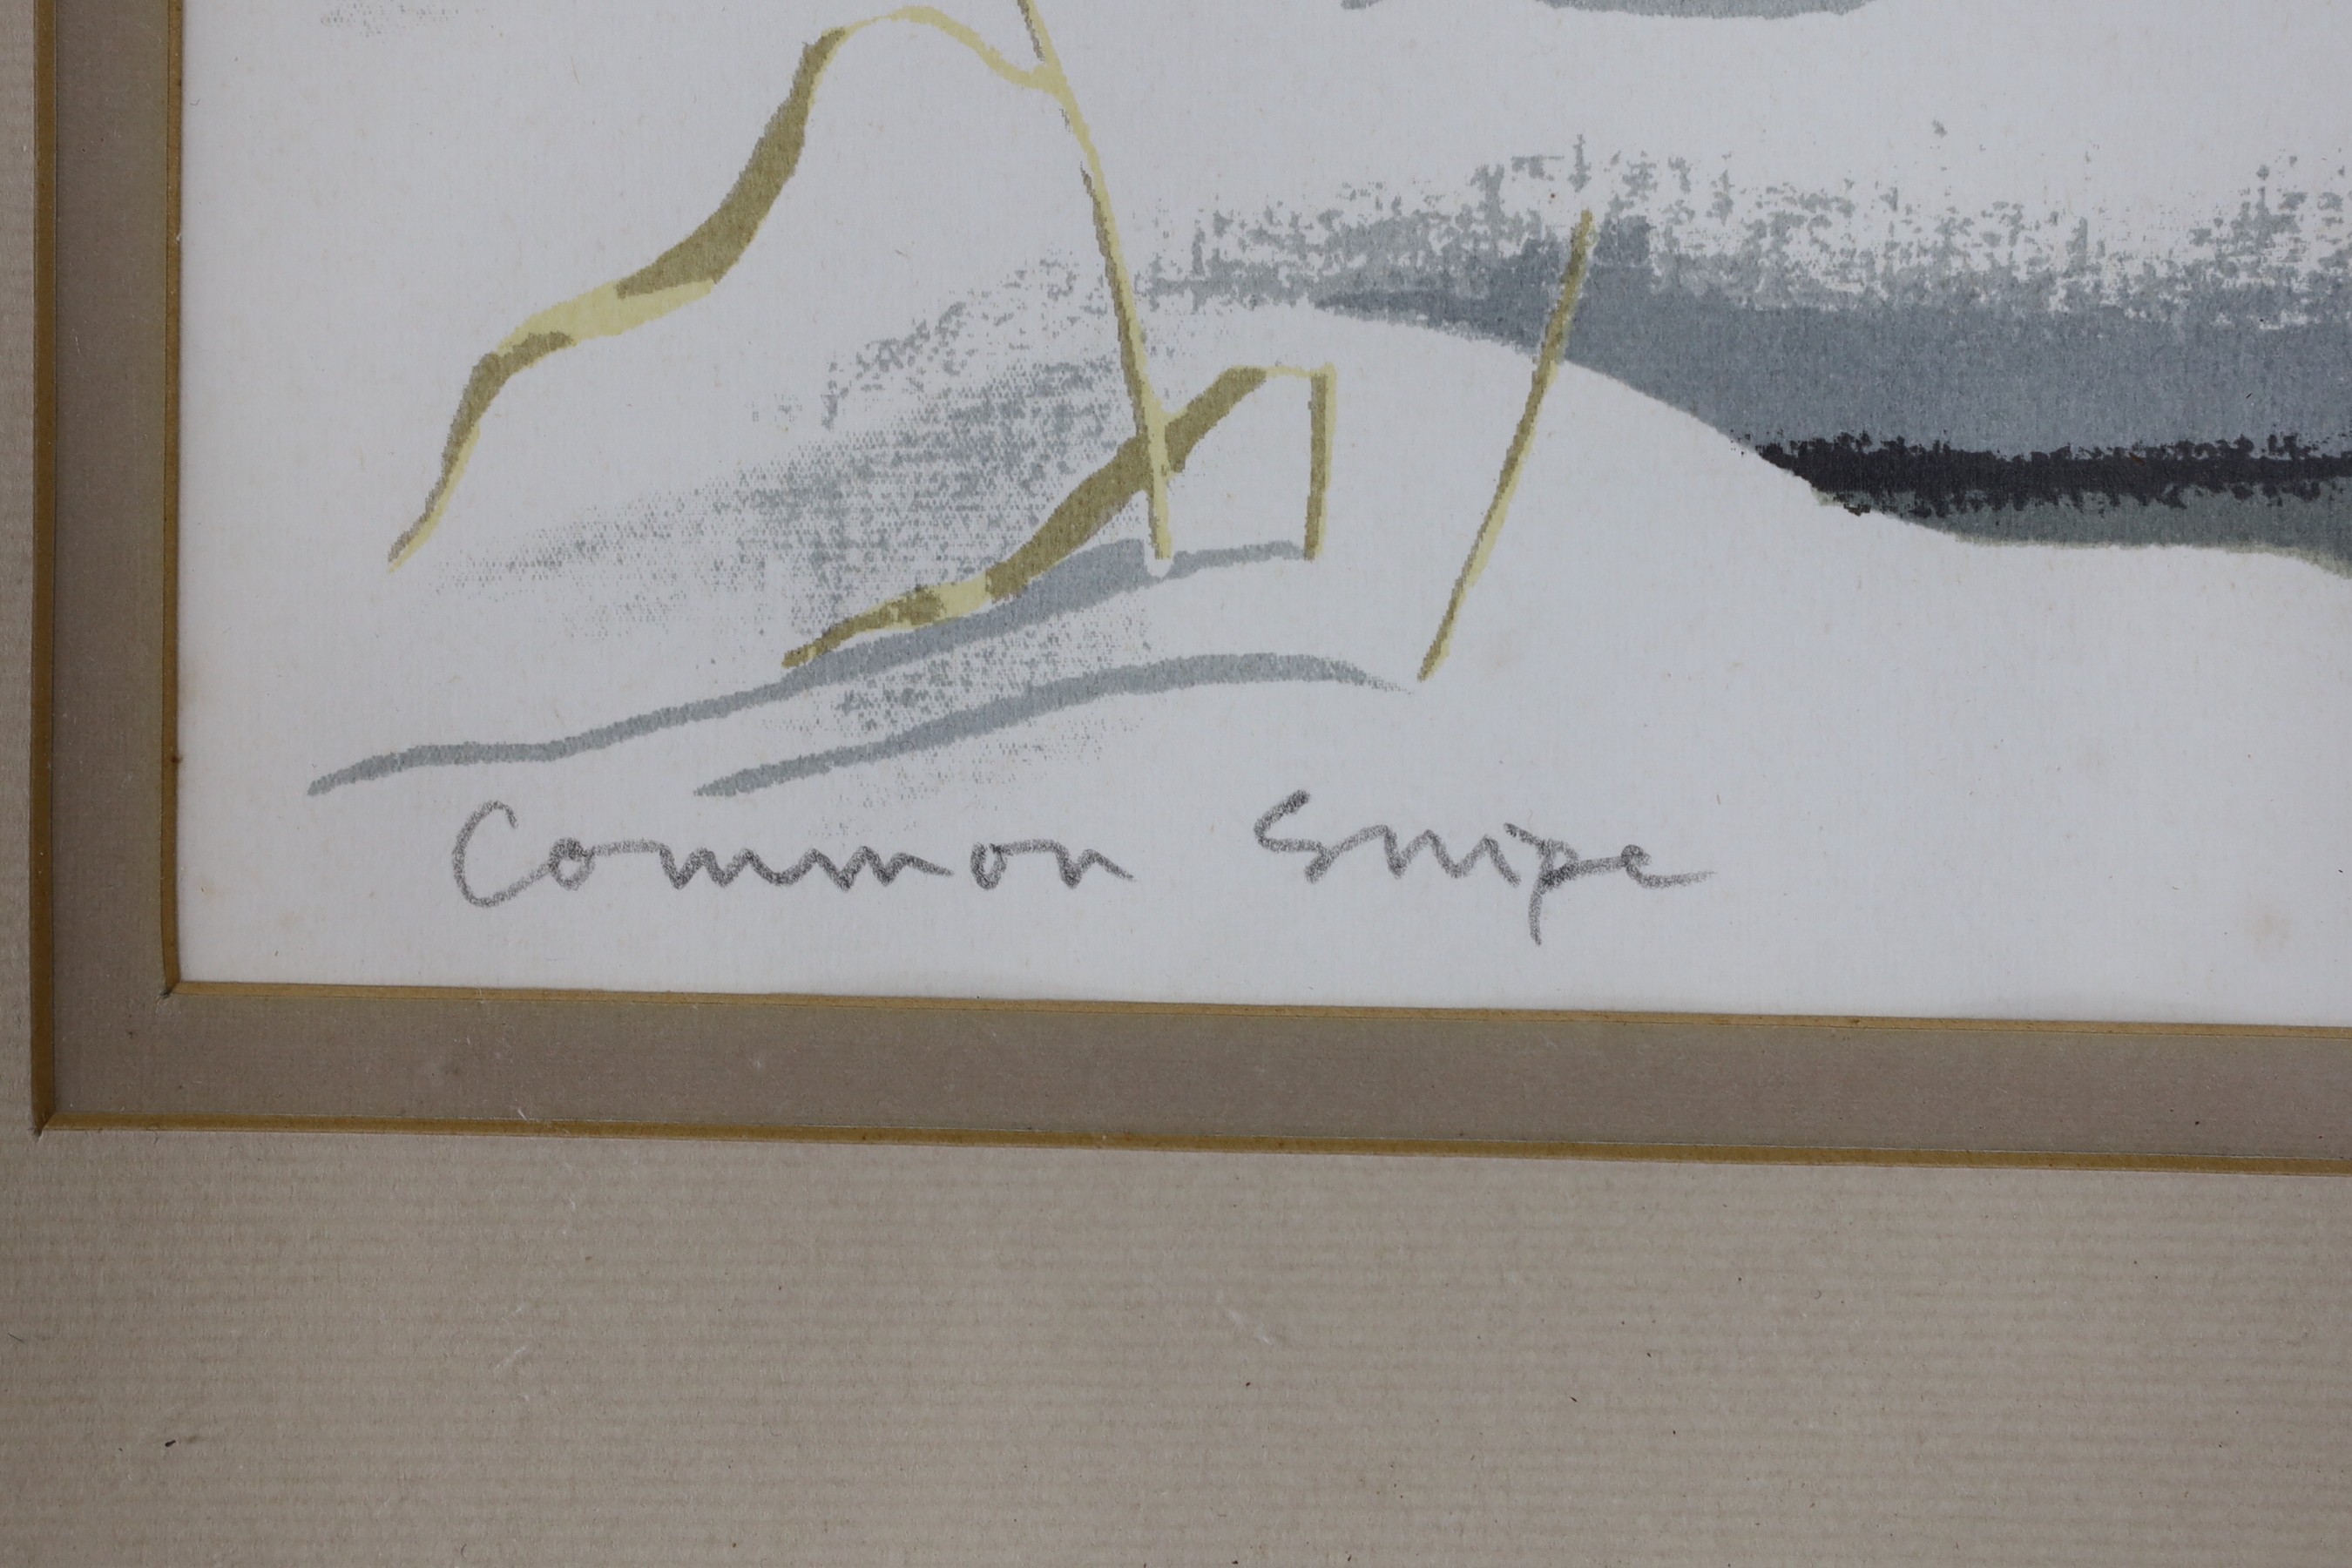 John Tennent (1926-), screenprint, 'Common Snipe', signed and dated 1986, 20/75, 31 x 43cm